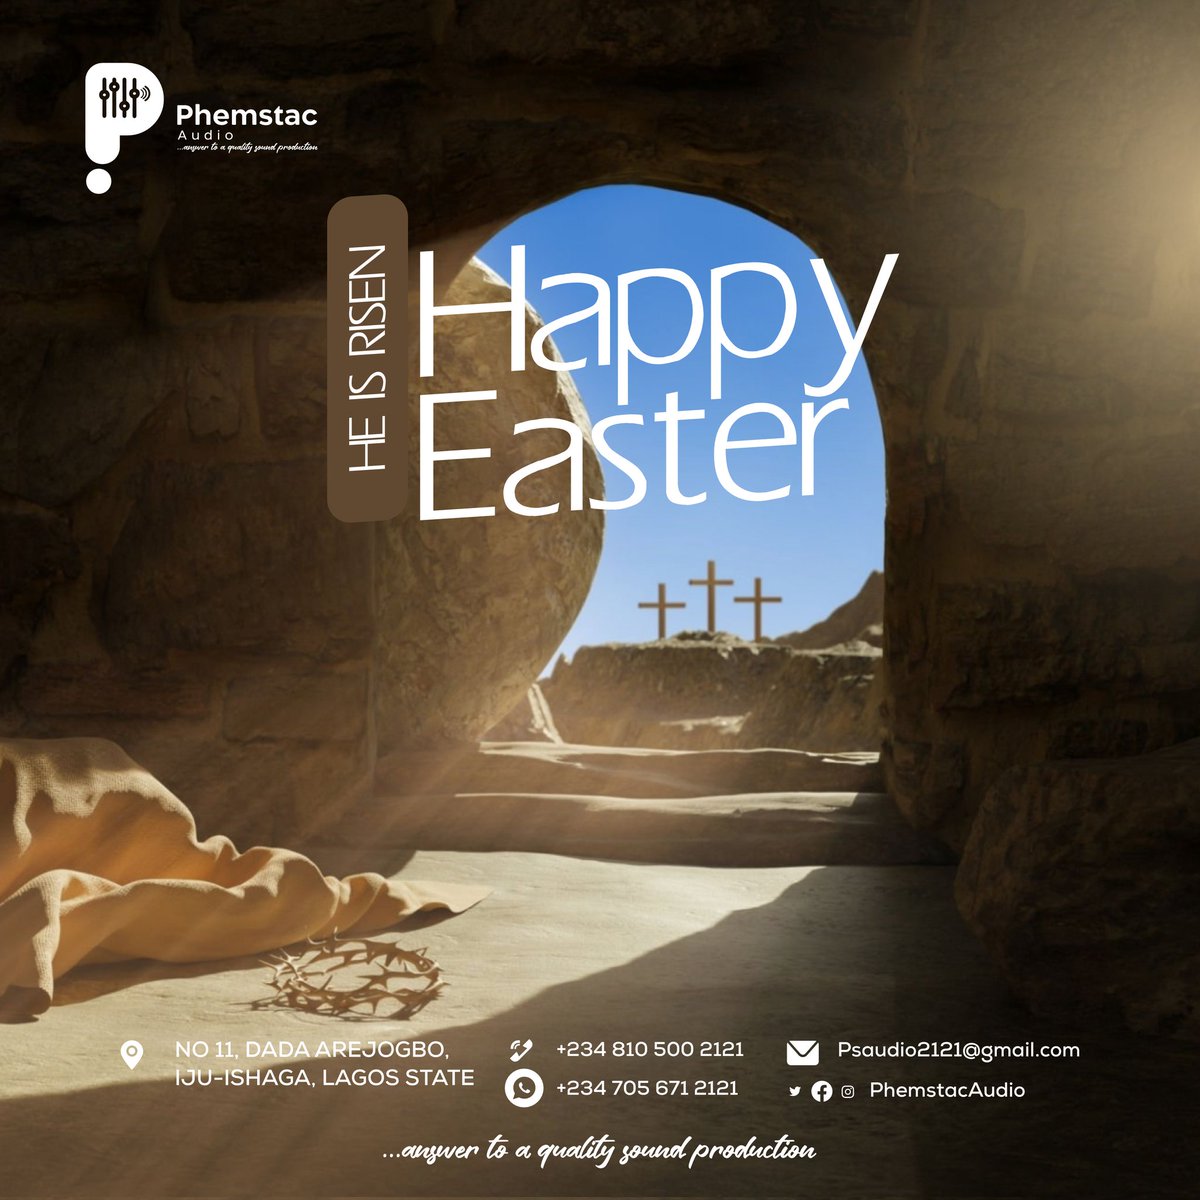 Let us celebrate the resurrection of our Lord Jesus Christ and hope that it brings peace and joy to our lives🥰
Happy Easter!🎉
Wishing you new hope, happiness, love and abundance this season.

-Phemstac Audio Team
#Easter #HeisRisen #IsraelAdesanya #Holland #IsaleEko #Drake